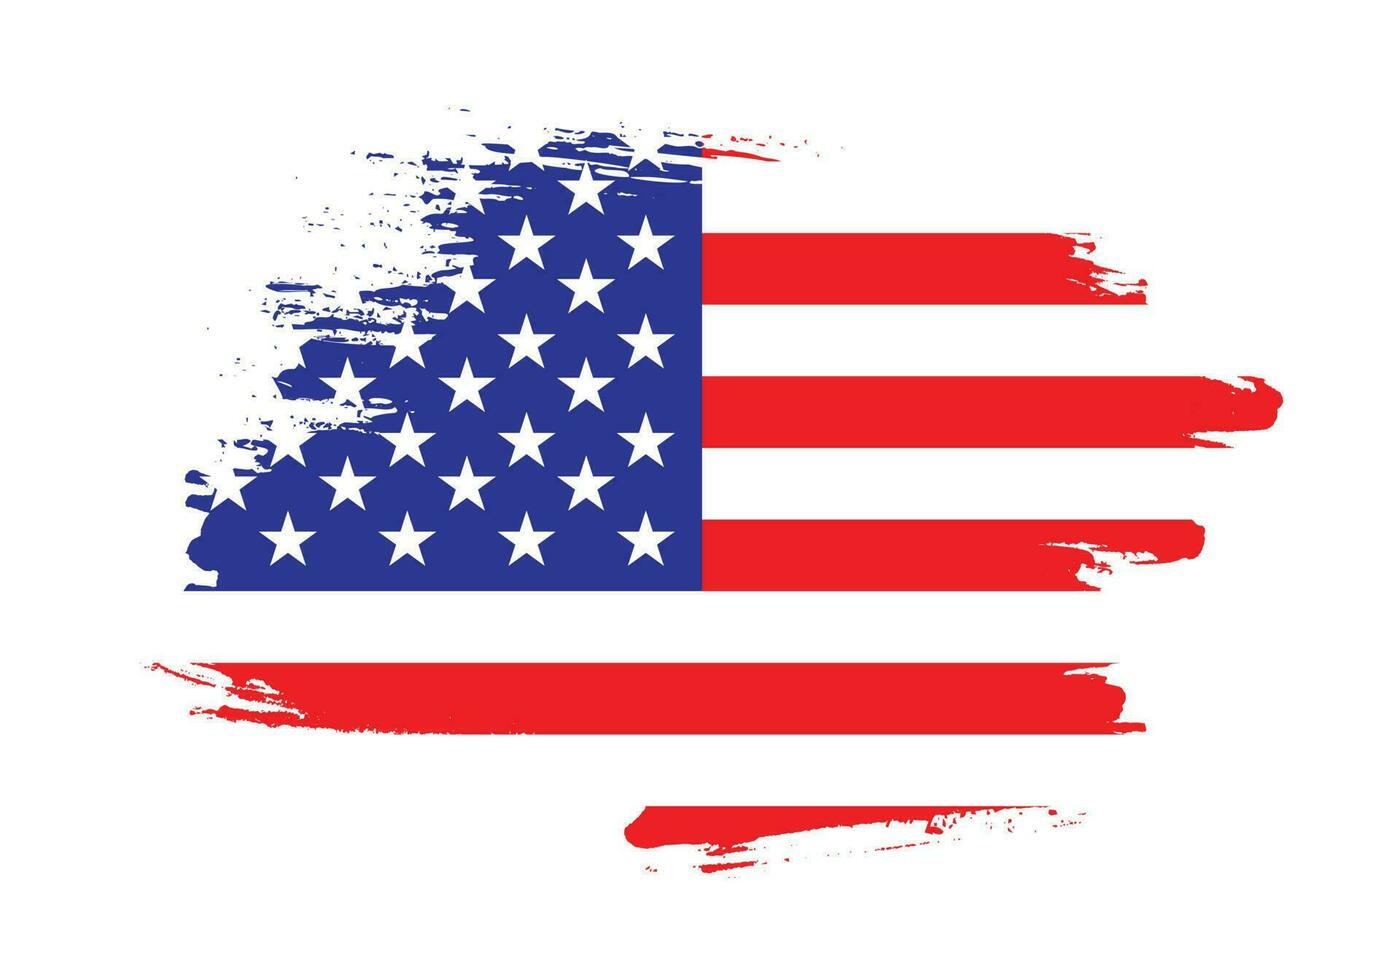 Paint brush stroke USA flag vector for free download